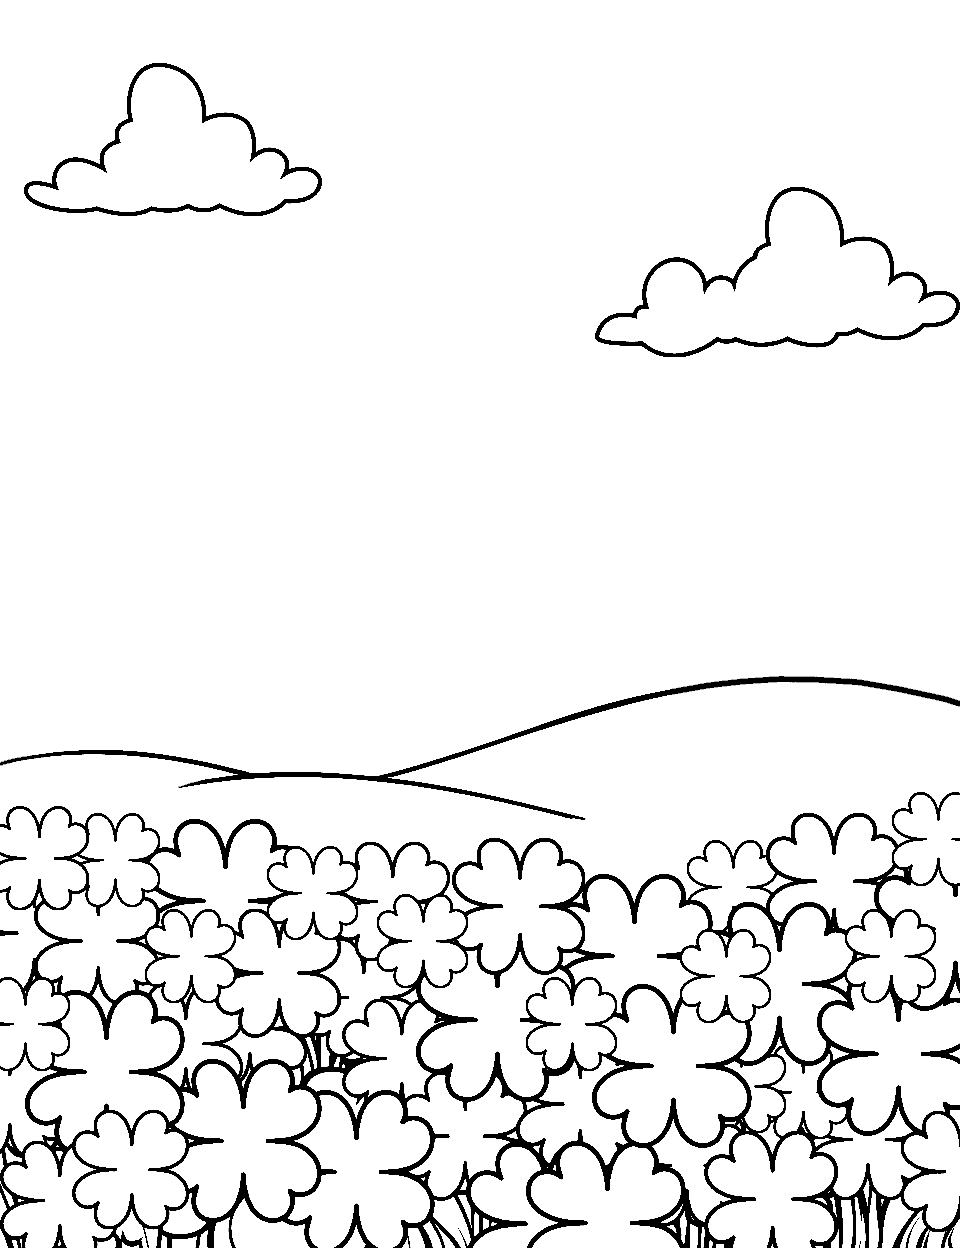 Clover Field Under Clouds Coloring Page - A sprawling clover field with a few fluffy clouds overhead.